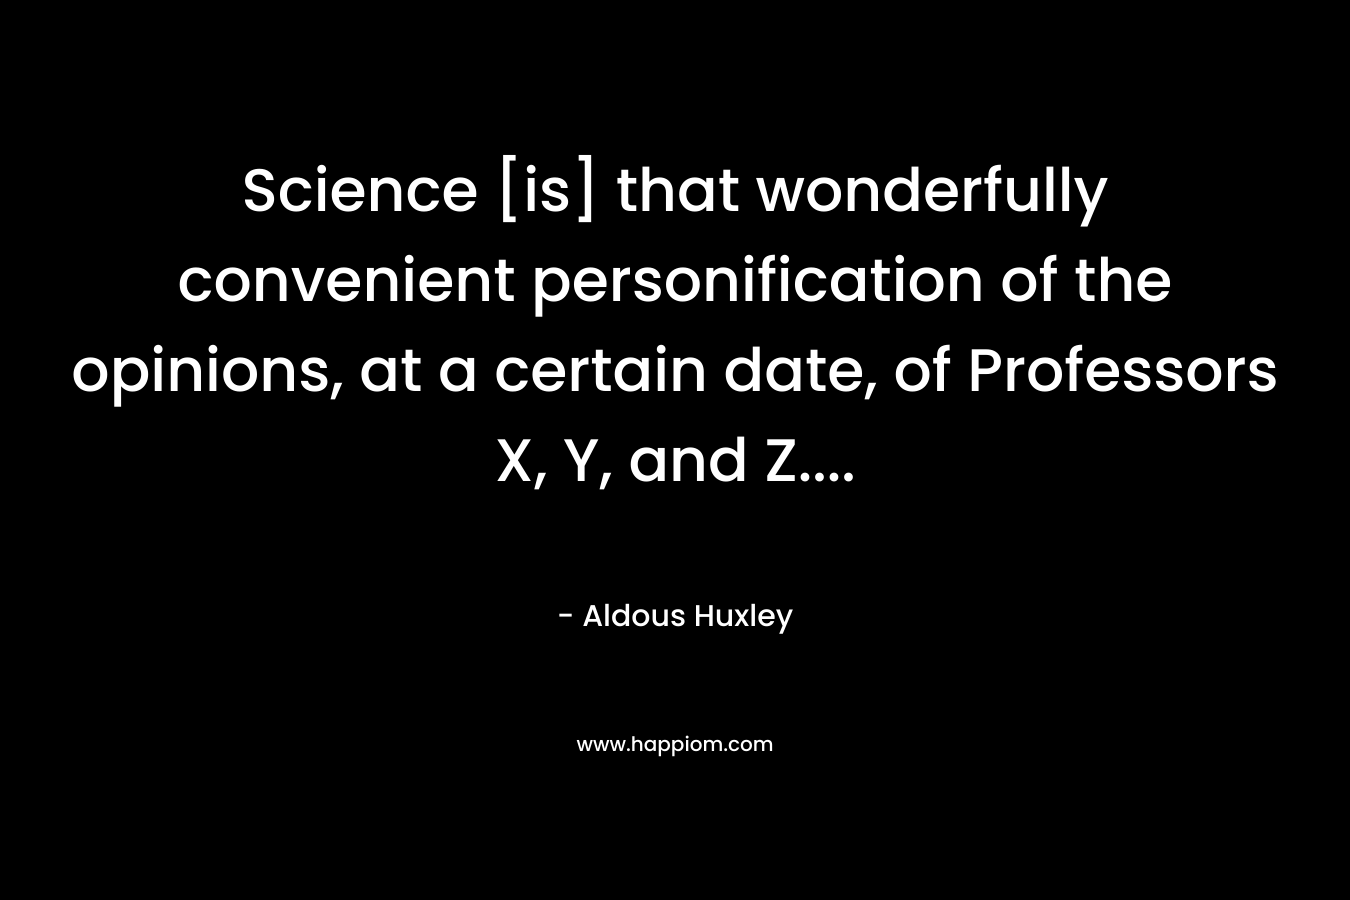 Science [is] that wonderfully convenient personification of the opinions, at a certain date, of Professors X, Y, and Z....